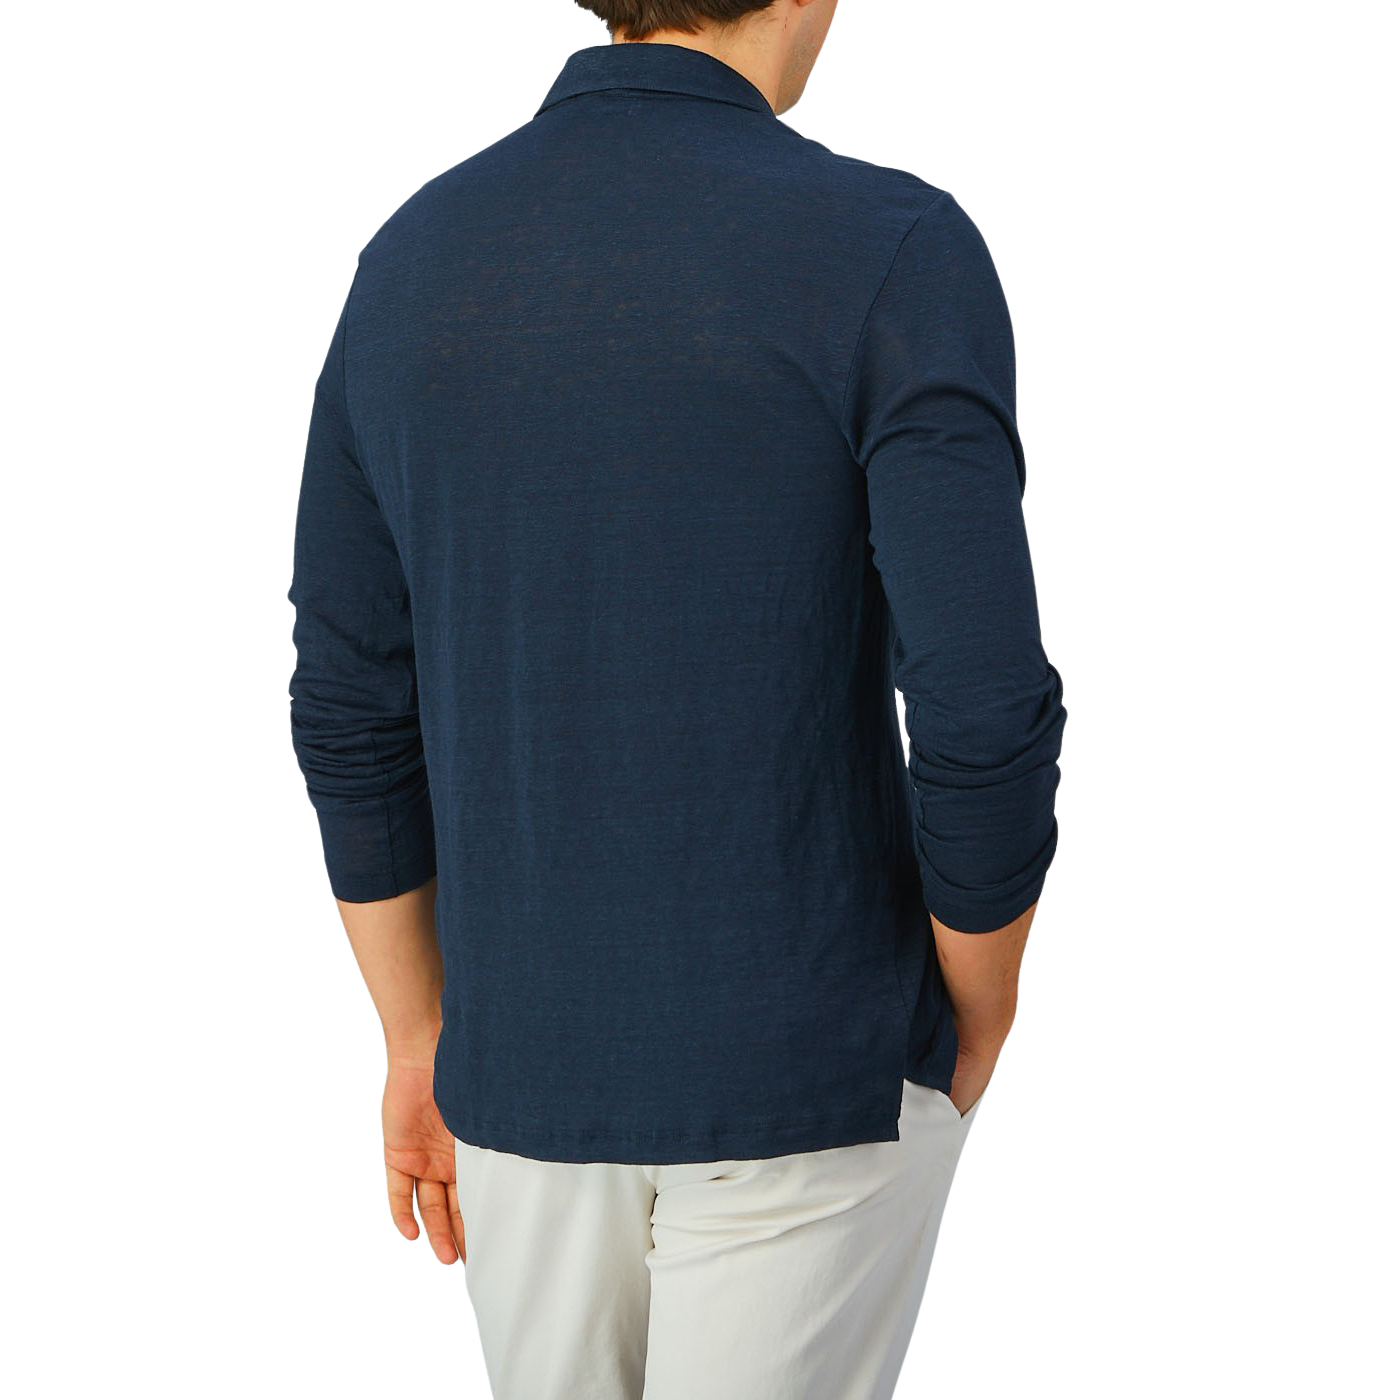 The back view of a man wearing a Gran Sasso Navy Blue Knitted Linen LS Polo Shirt.